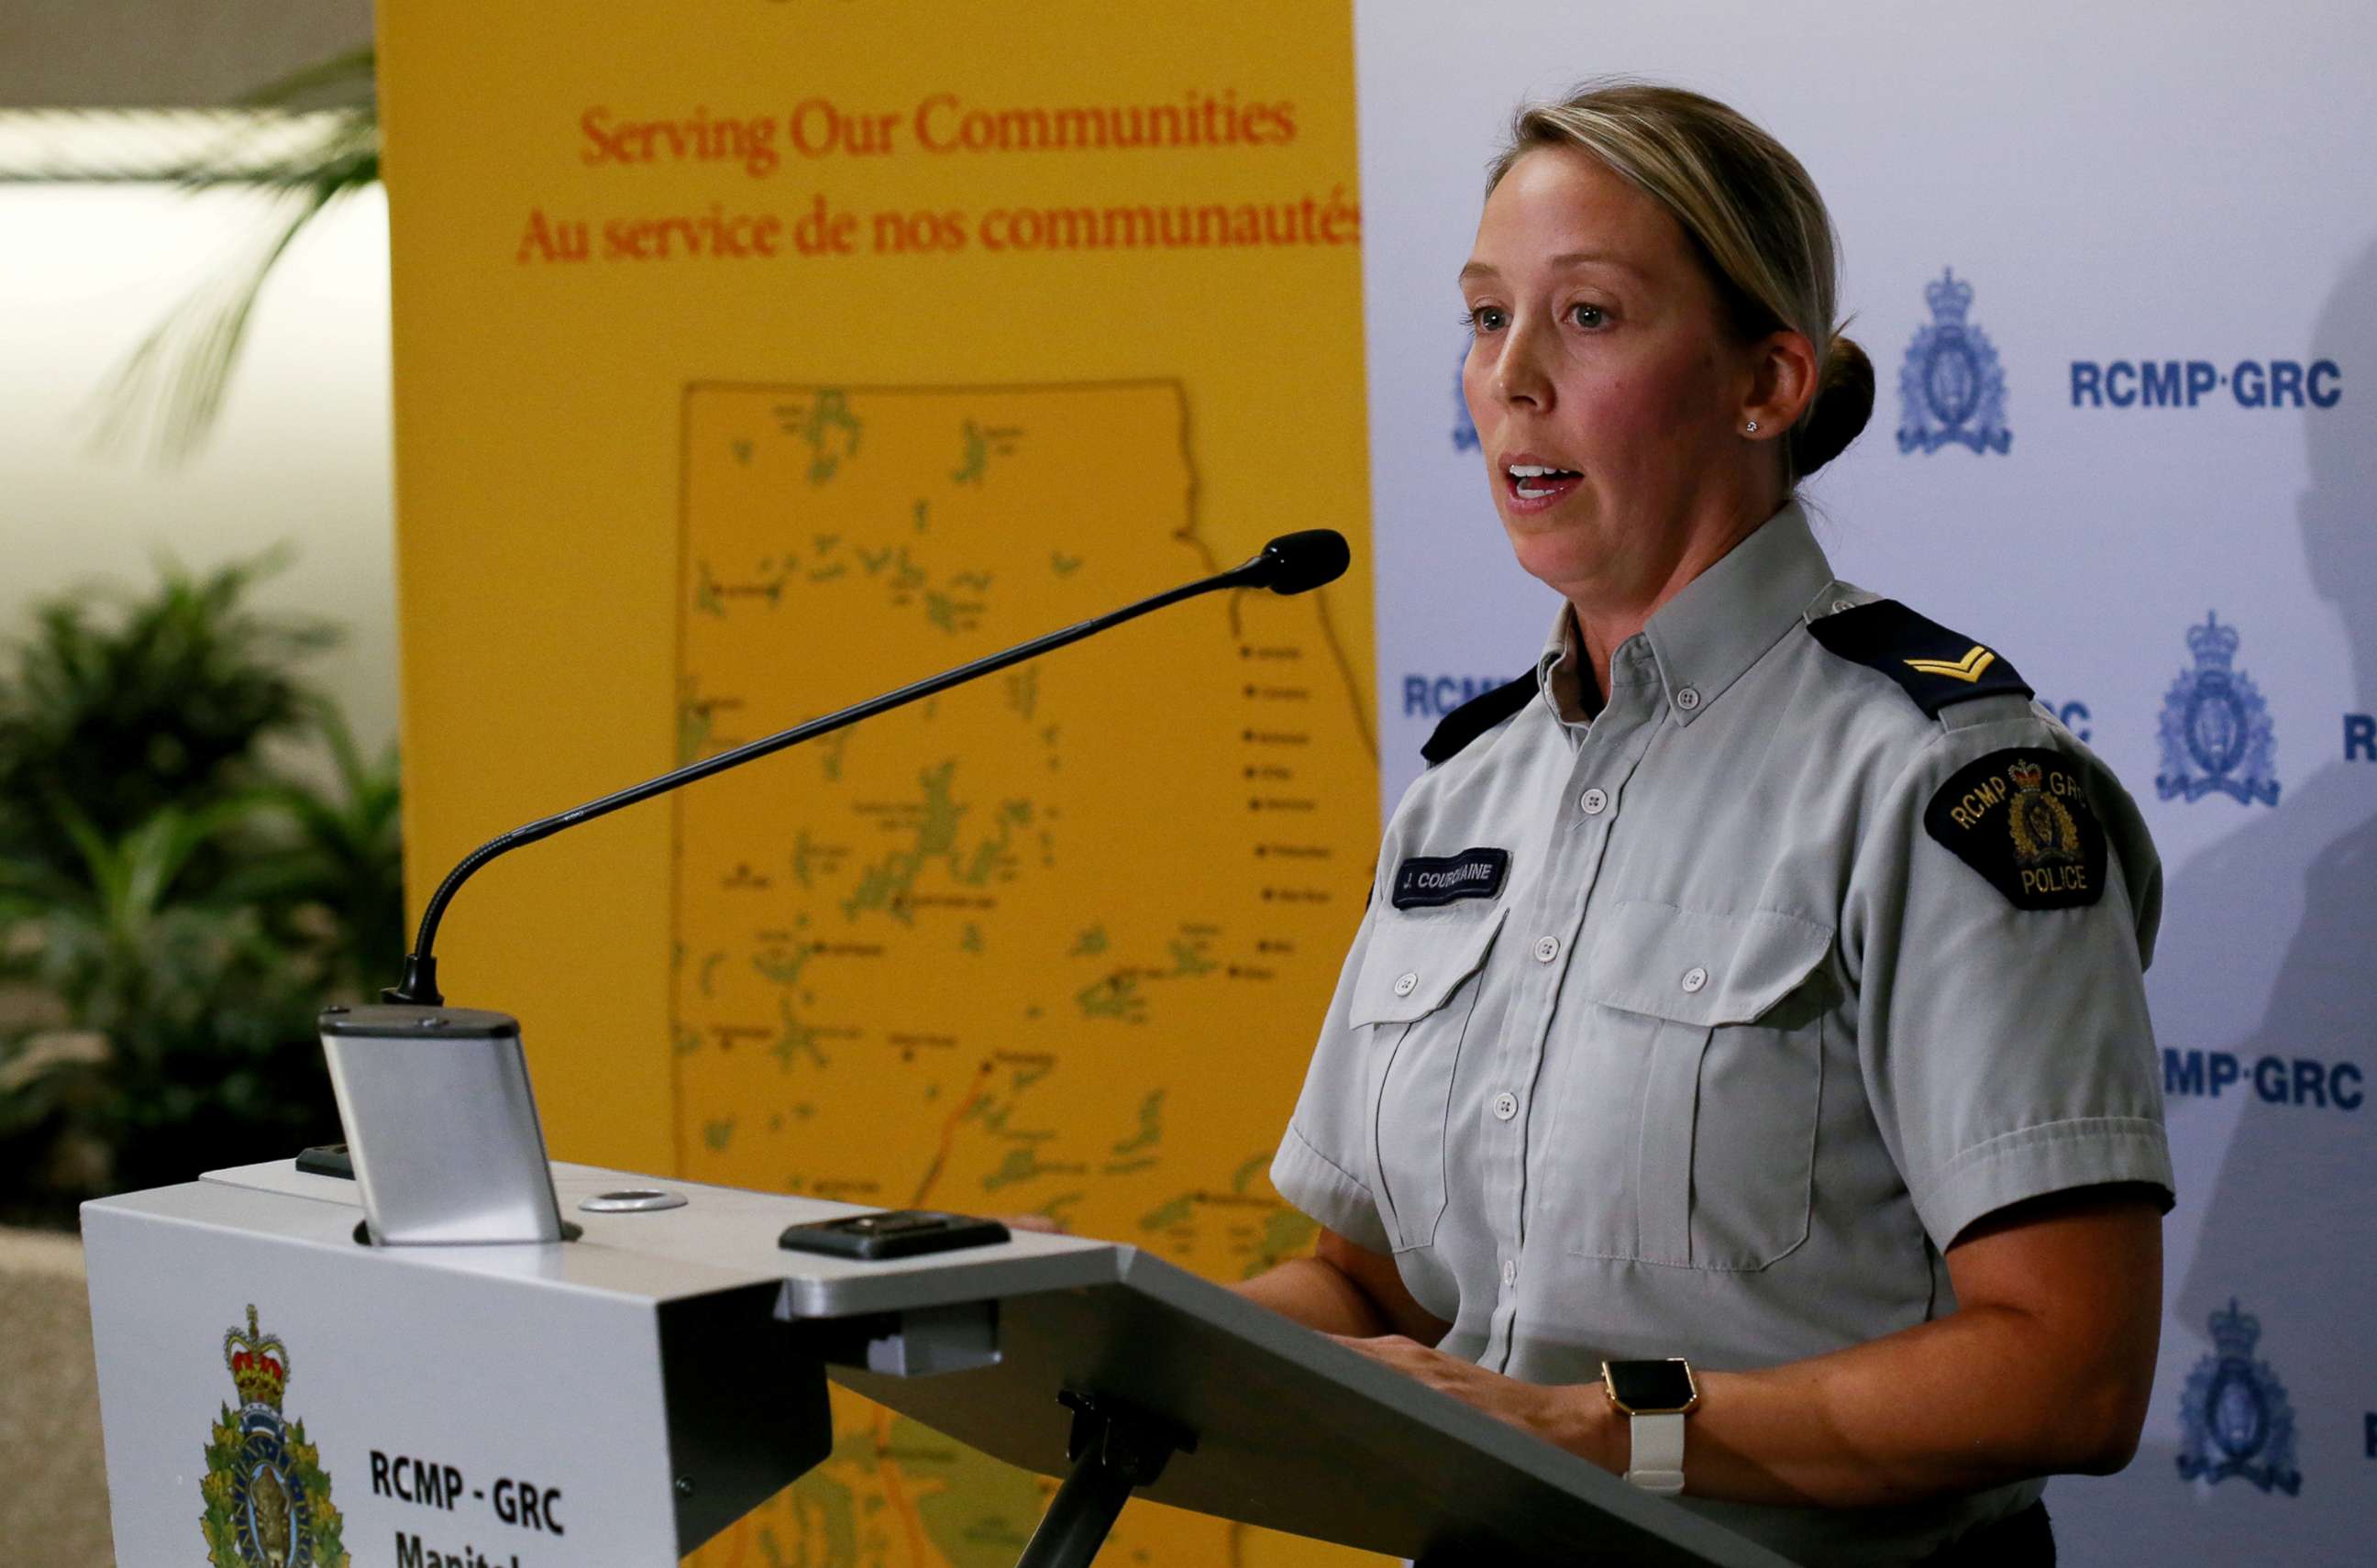 PHOTO: Cpl. Julie Courchaine, of the Royal Canadian Mounted Police, speaks to members of the media regarding the search for the suspects near Gillam, Manitoba, at the RCMP "D" Division Headquarters in Winnipeg, Manitoba Canada, July 24, 2019.